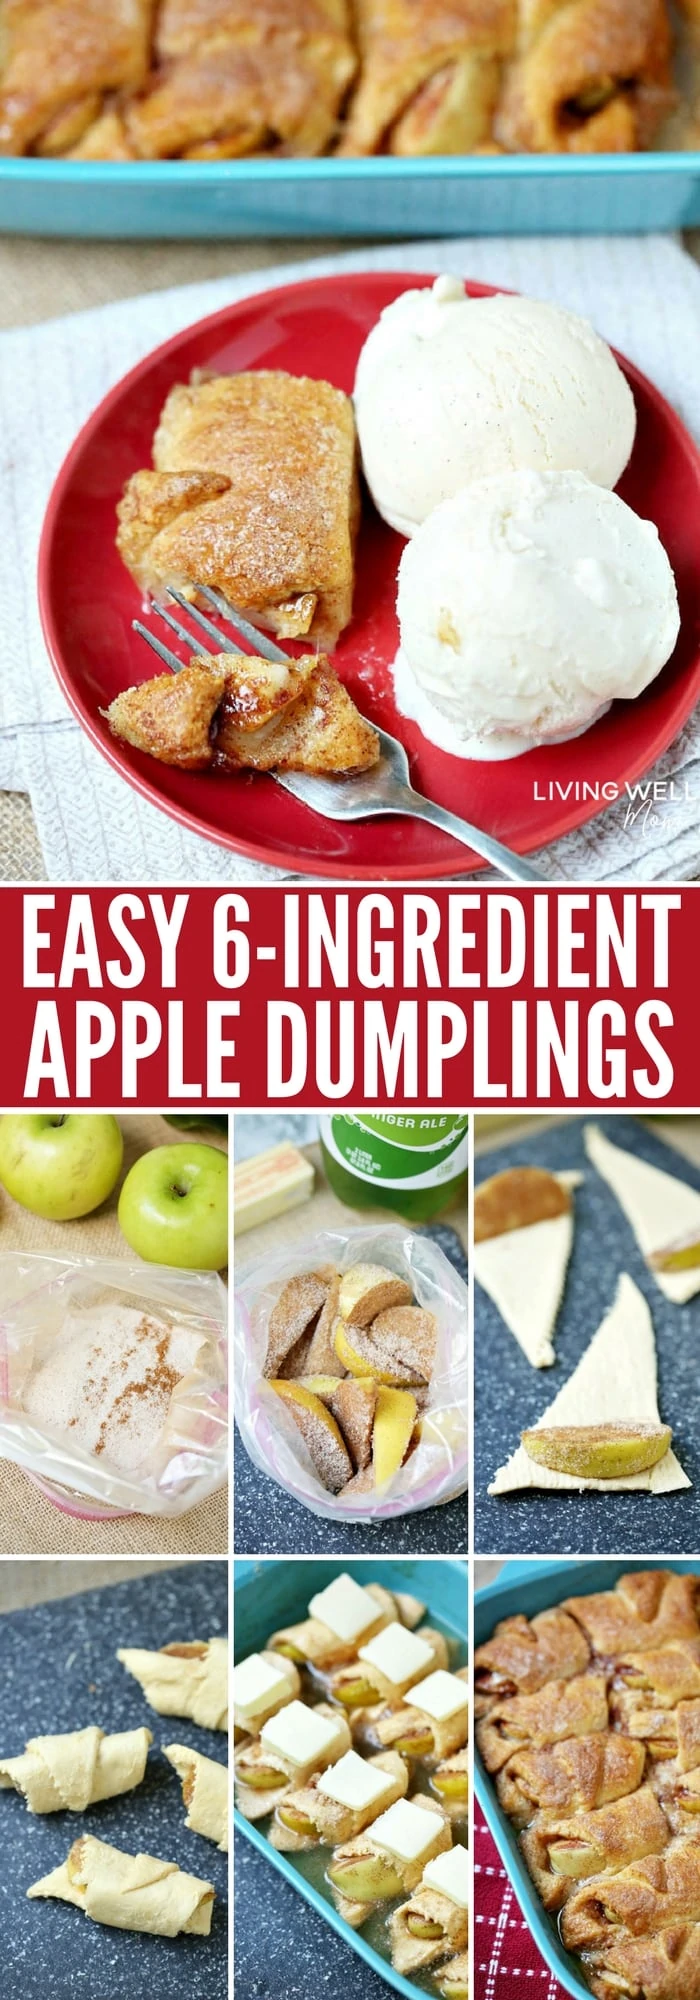 This simple recipe for 6-ingredient apple dumplings is so easy to make, it’s perfect for letting your kids help you bake. This apple dessert might become a fall favorite for your family just like it has for mine!